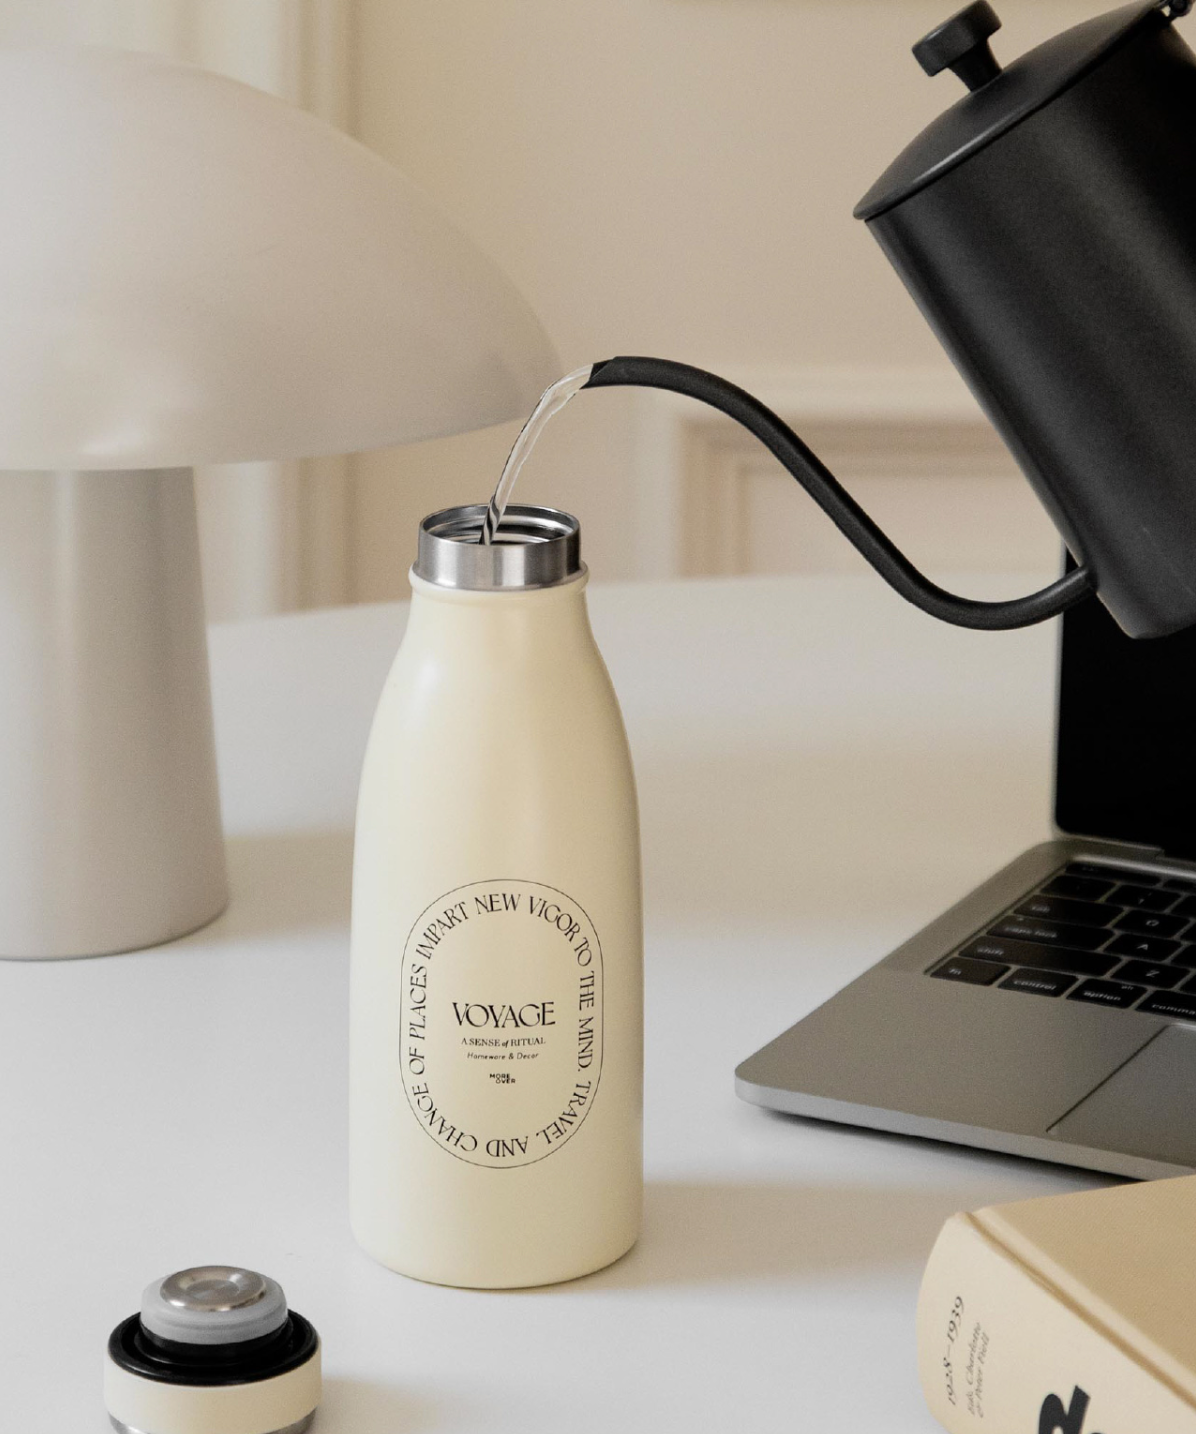 Voyage creamy stainless steel high capacity heat insulating vacuum bottle with beautiful letters on it, by A Bit Sleepy homeware tableware concept store